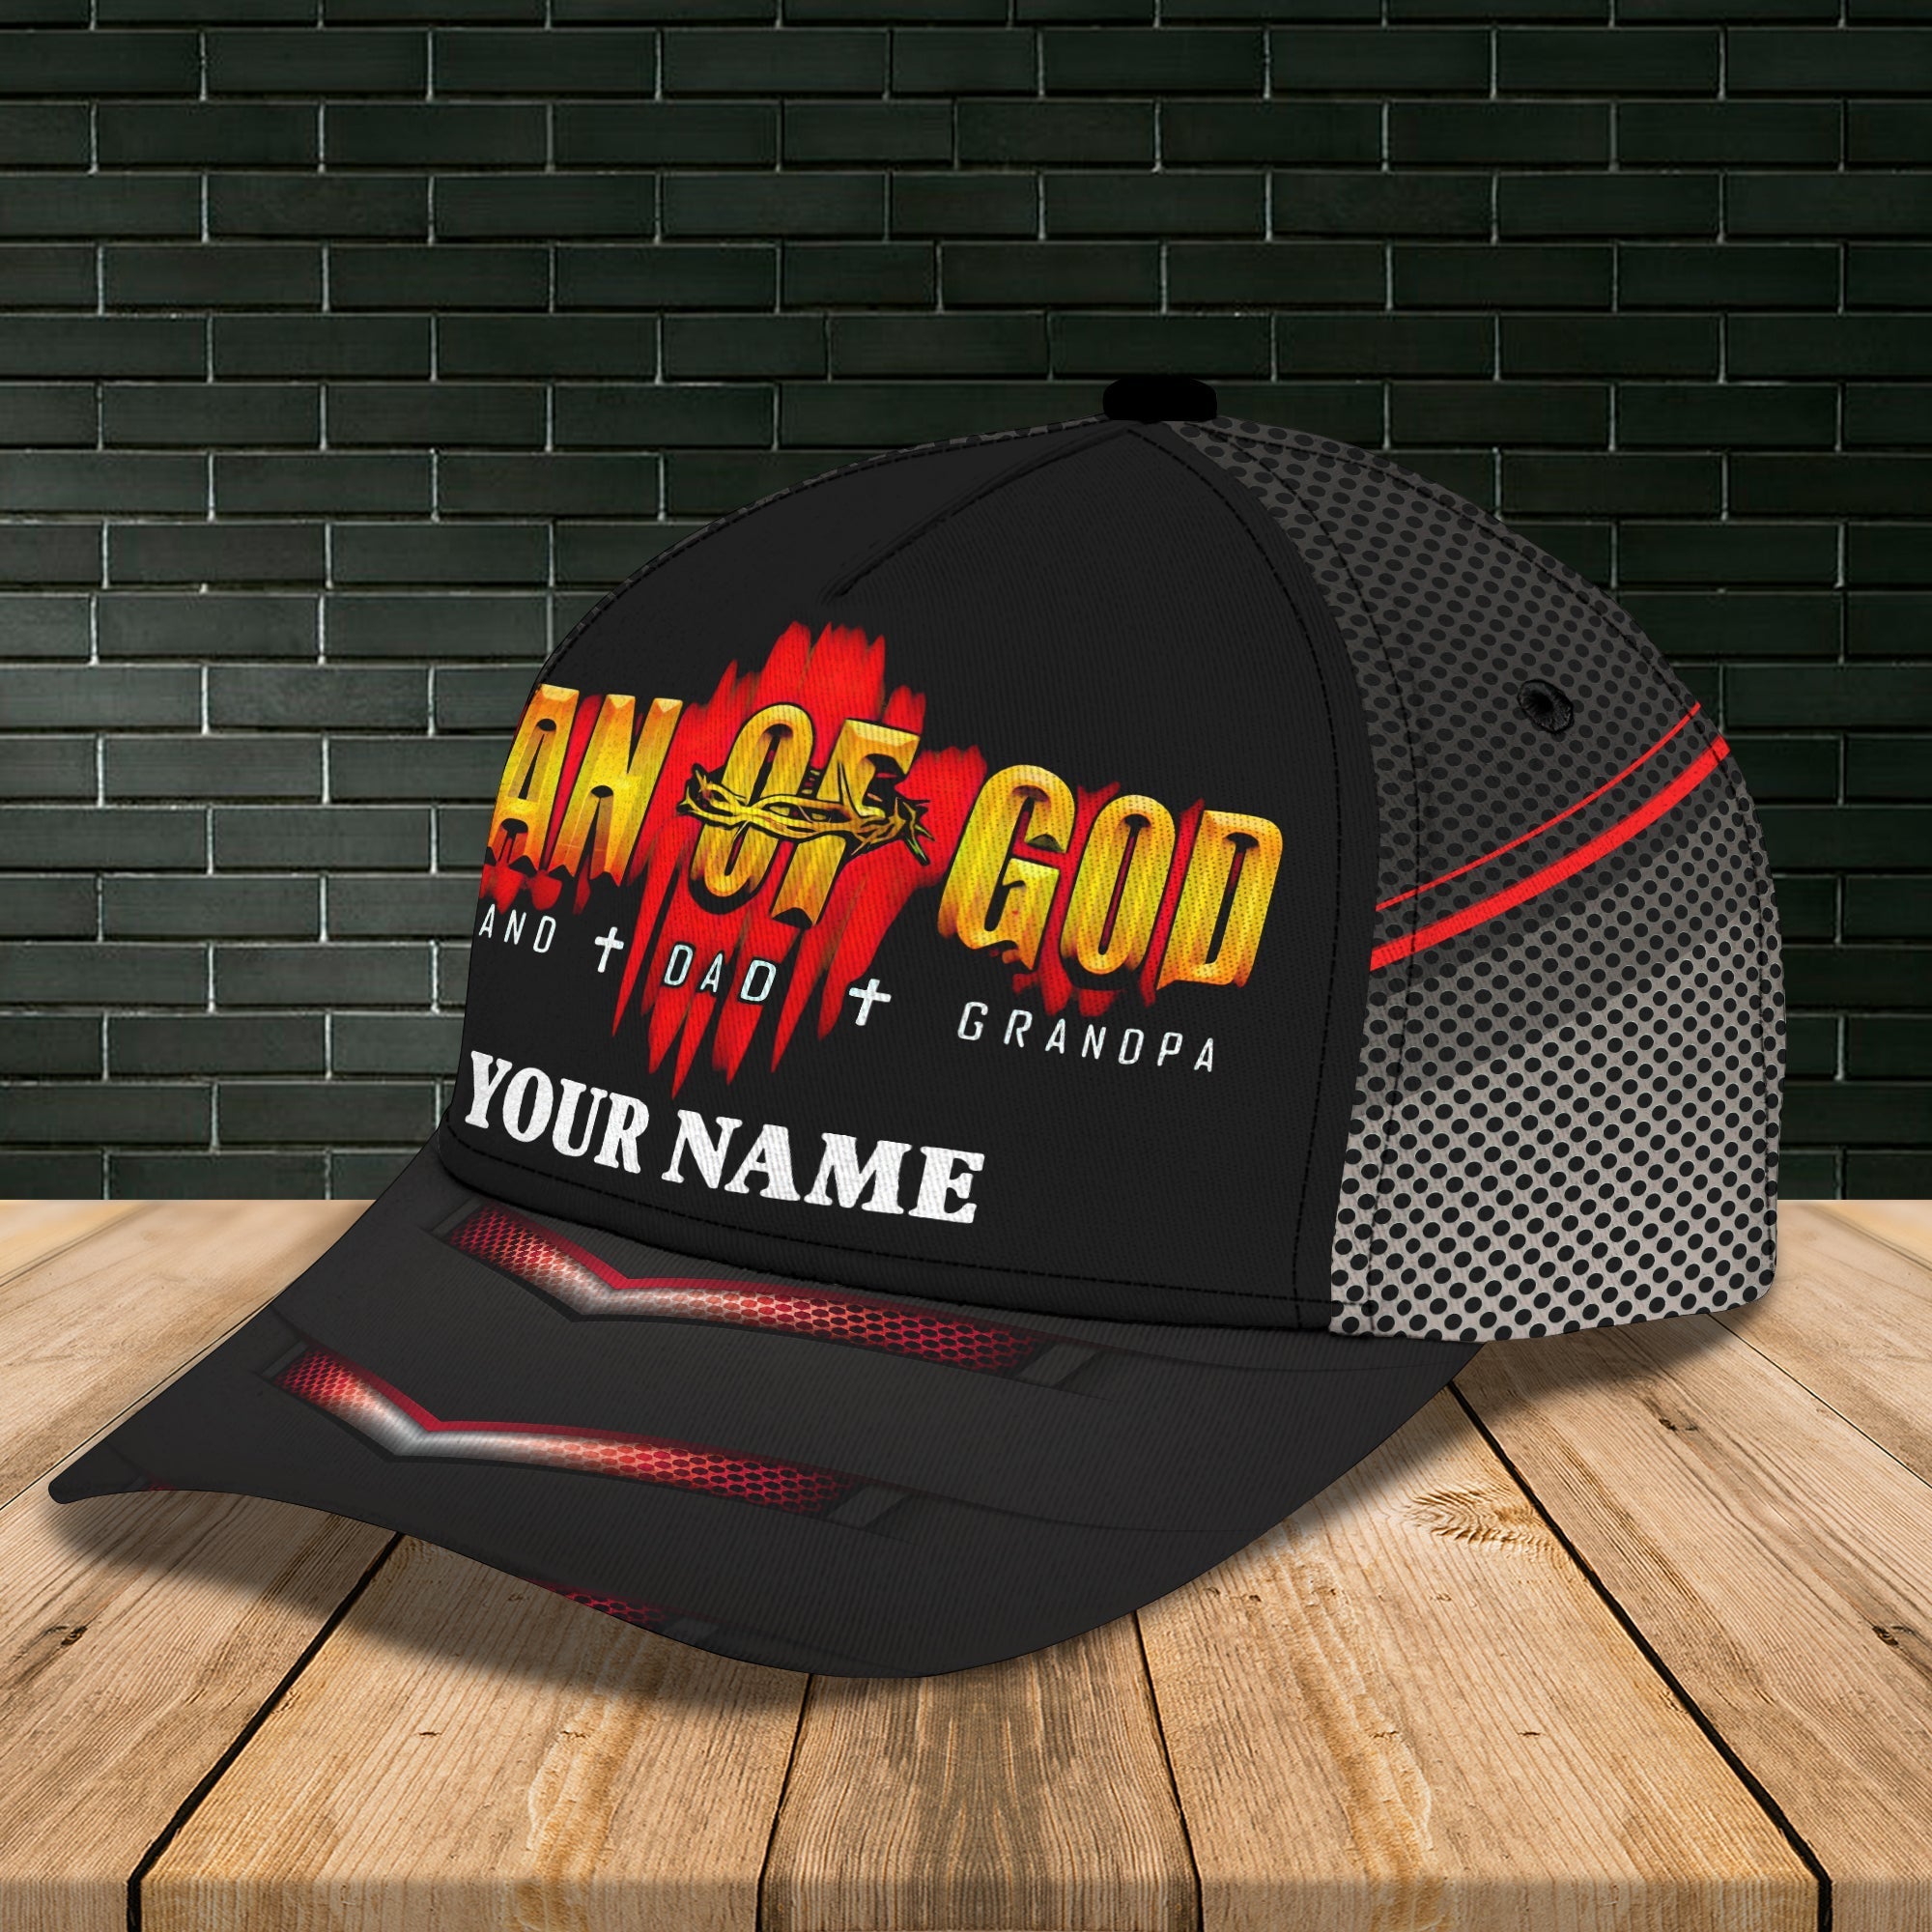 Personalized Man Of God Cap Hat/ 3D Baseball Cap Hat For Father/ Classic Dad Cap/ Dad Hat